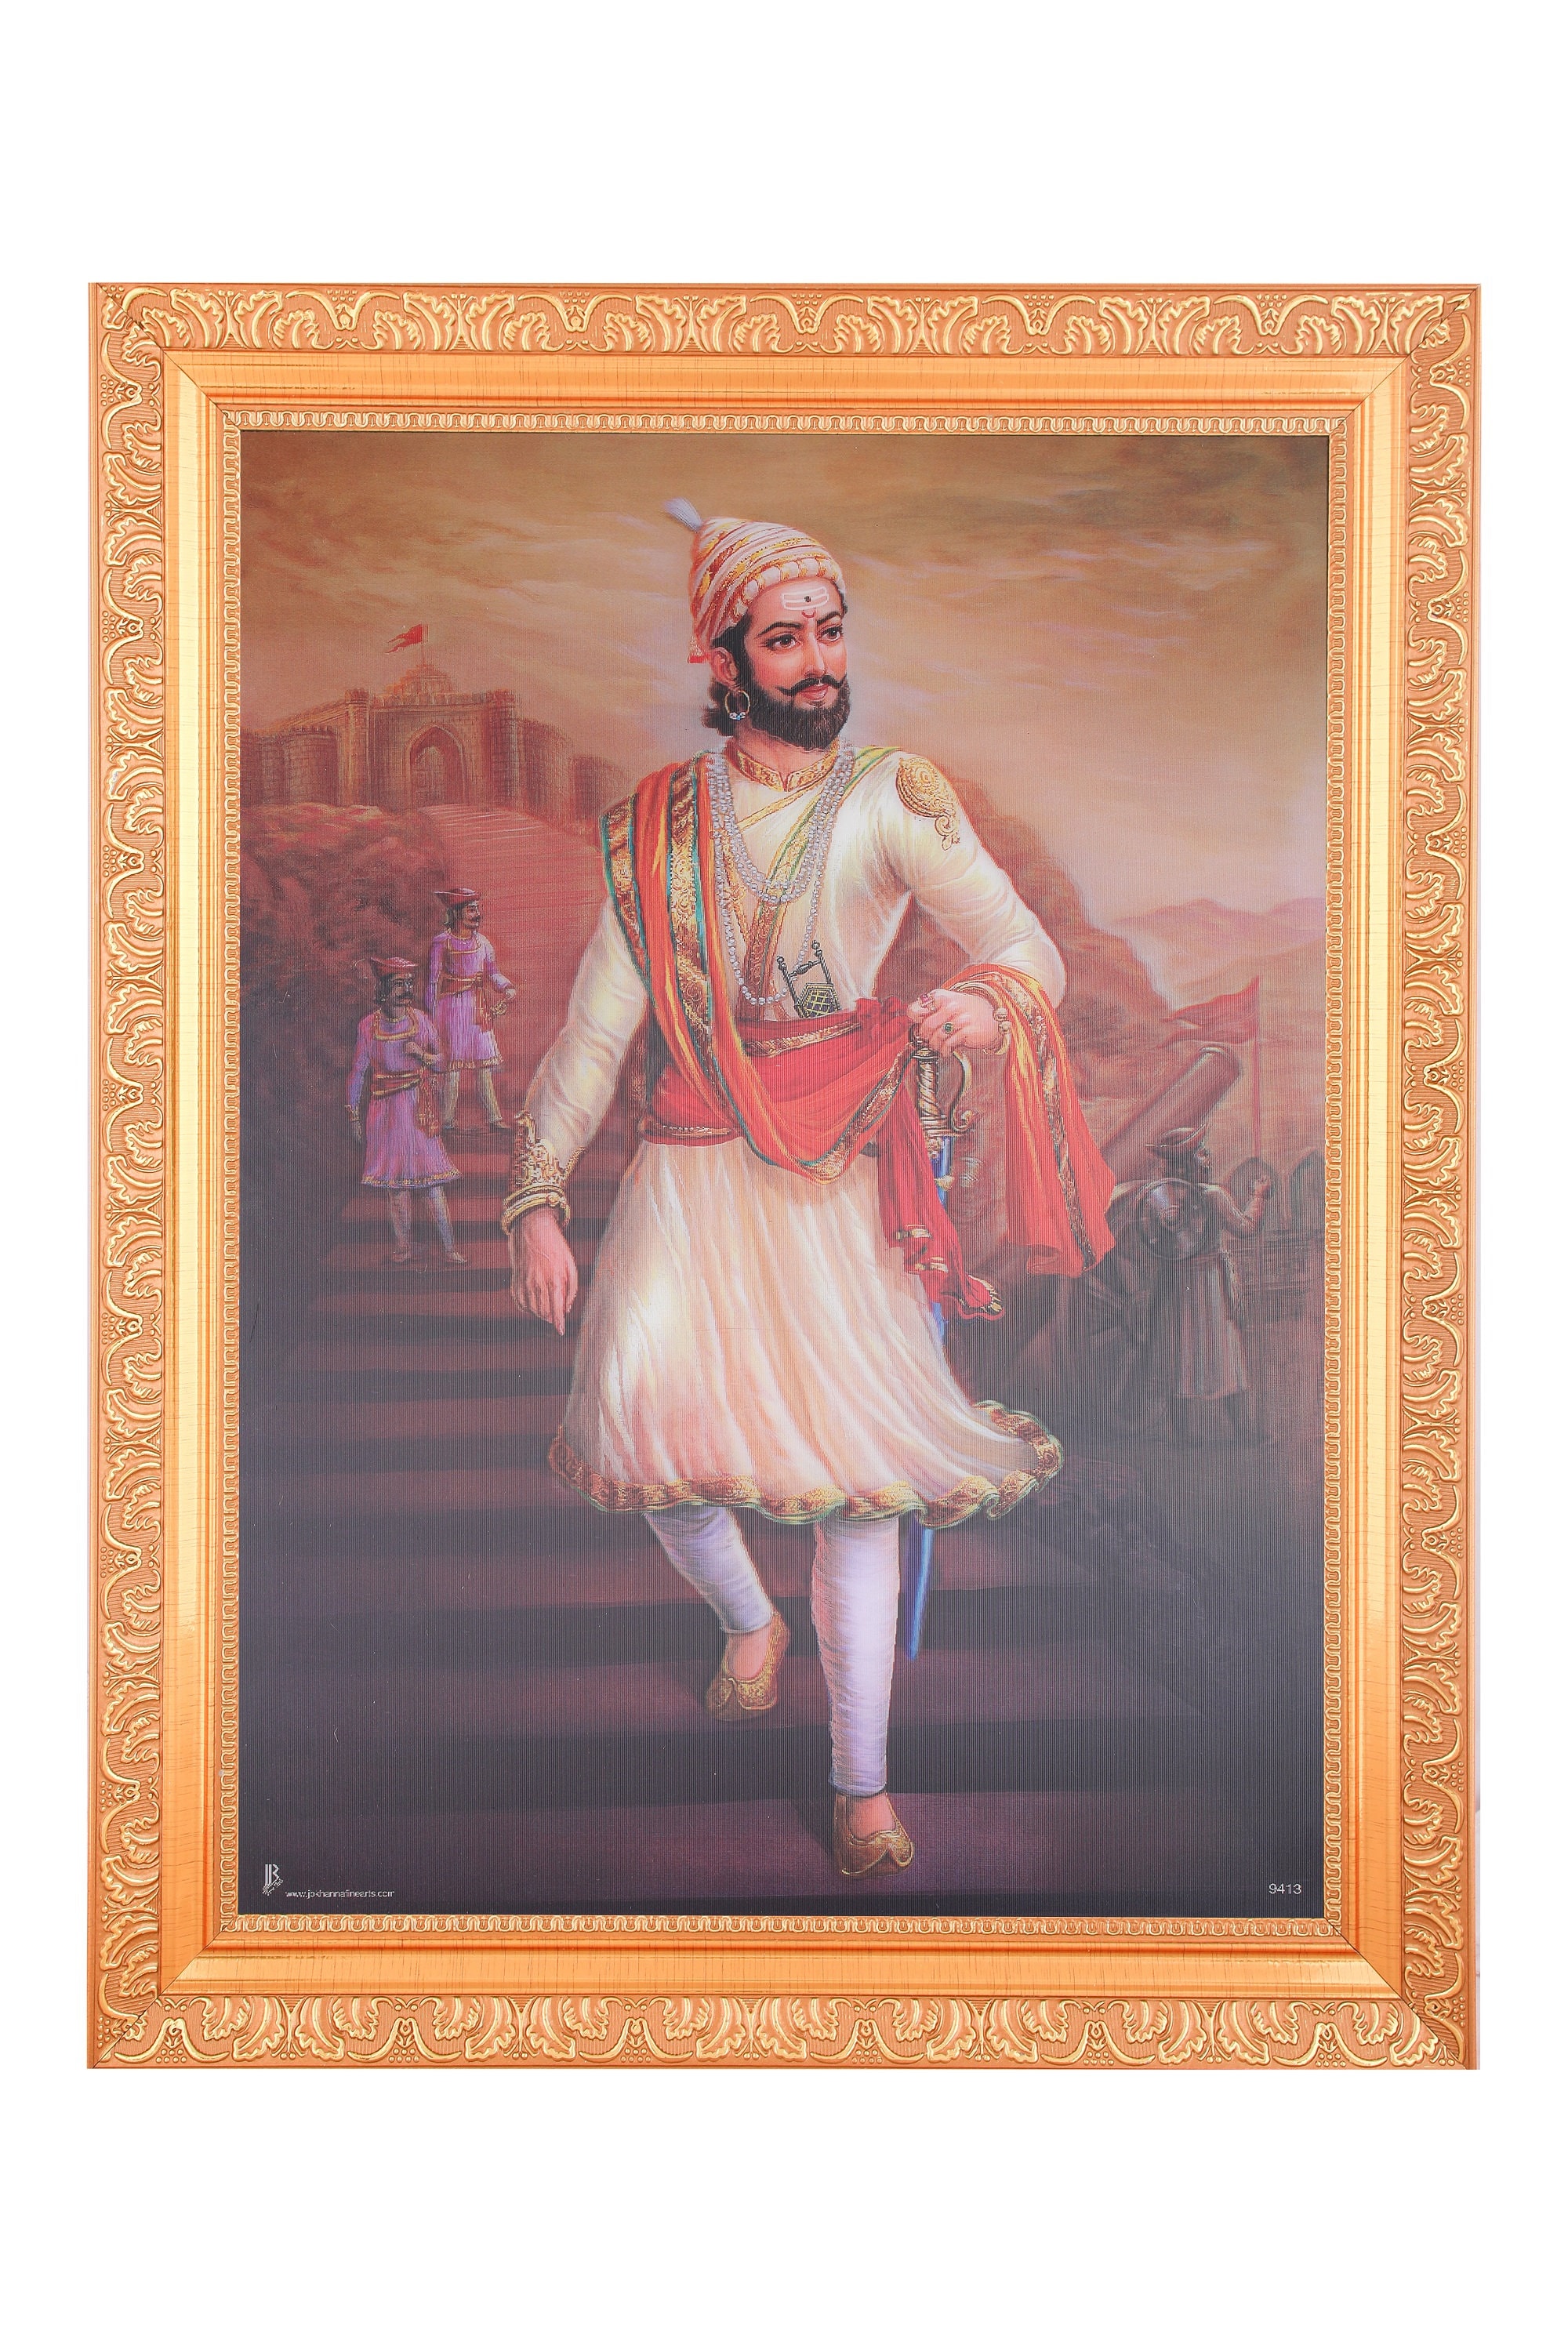 SBD Shivaji Maharaj Fancy Dress Costume For Kids - Buy SBD Shivaji Maharaj  Fancy Dress Costume For Kids Online at Low Price - Snapdeal